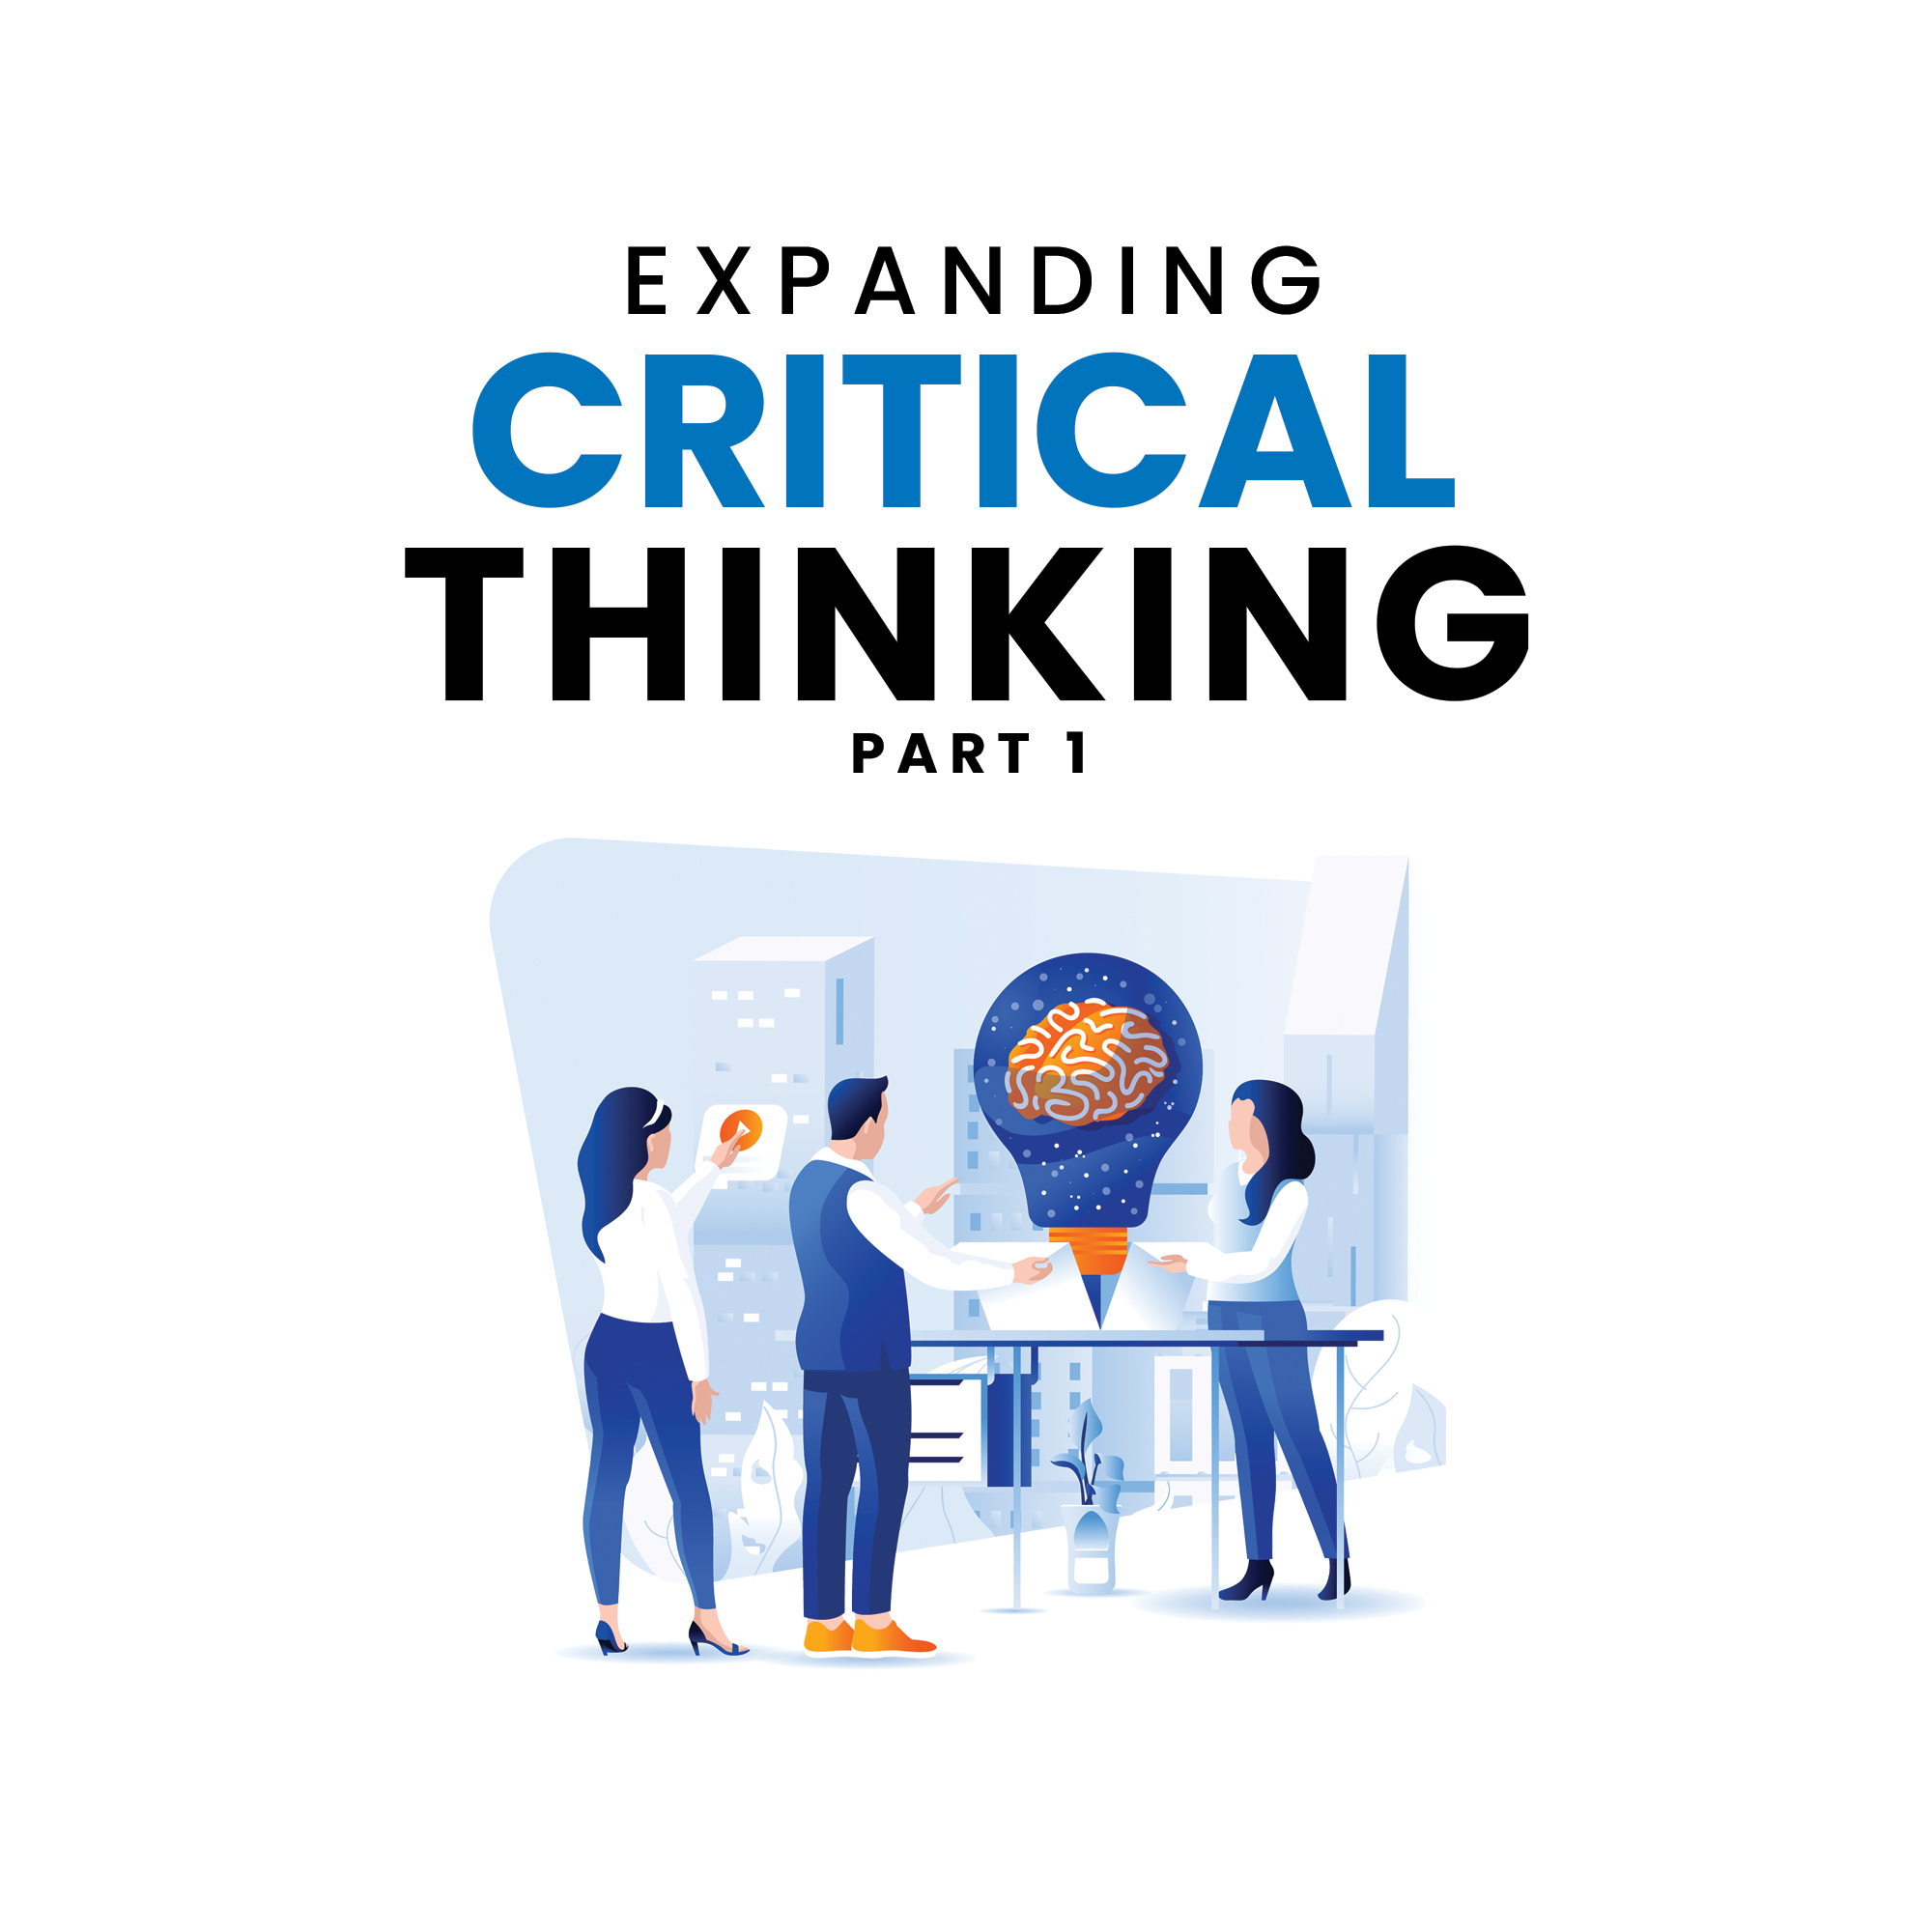 Expanding Critical Thinking Part 1